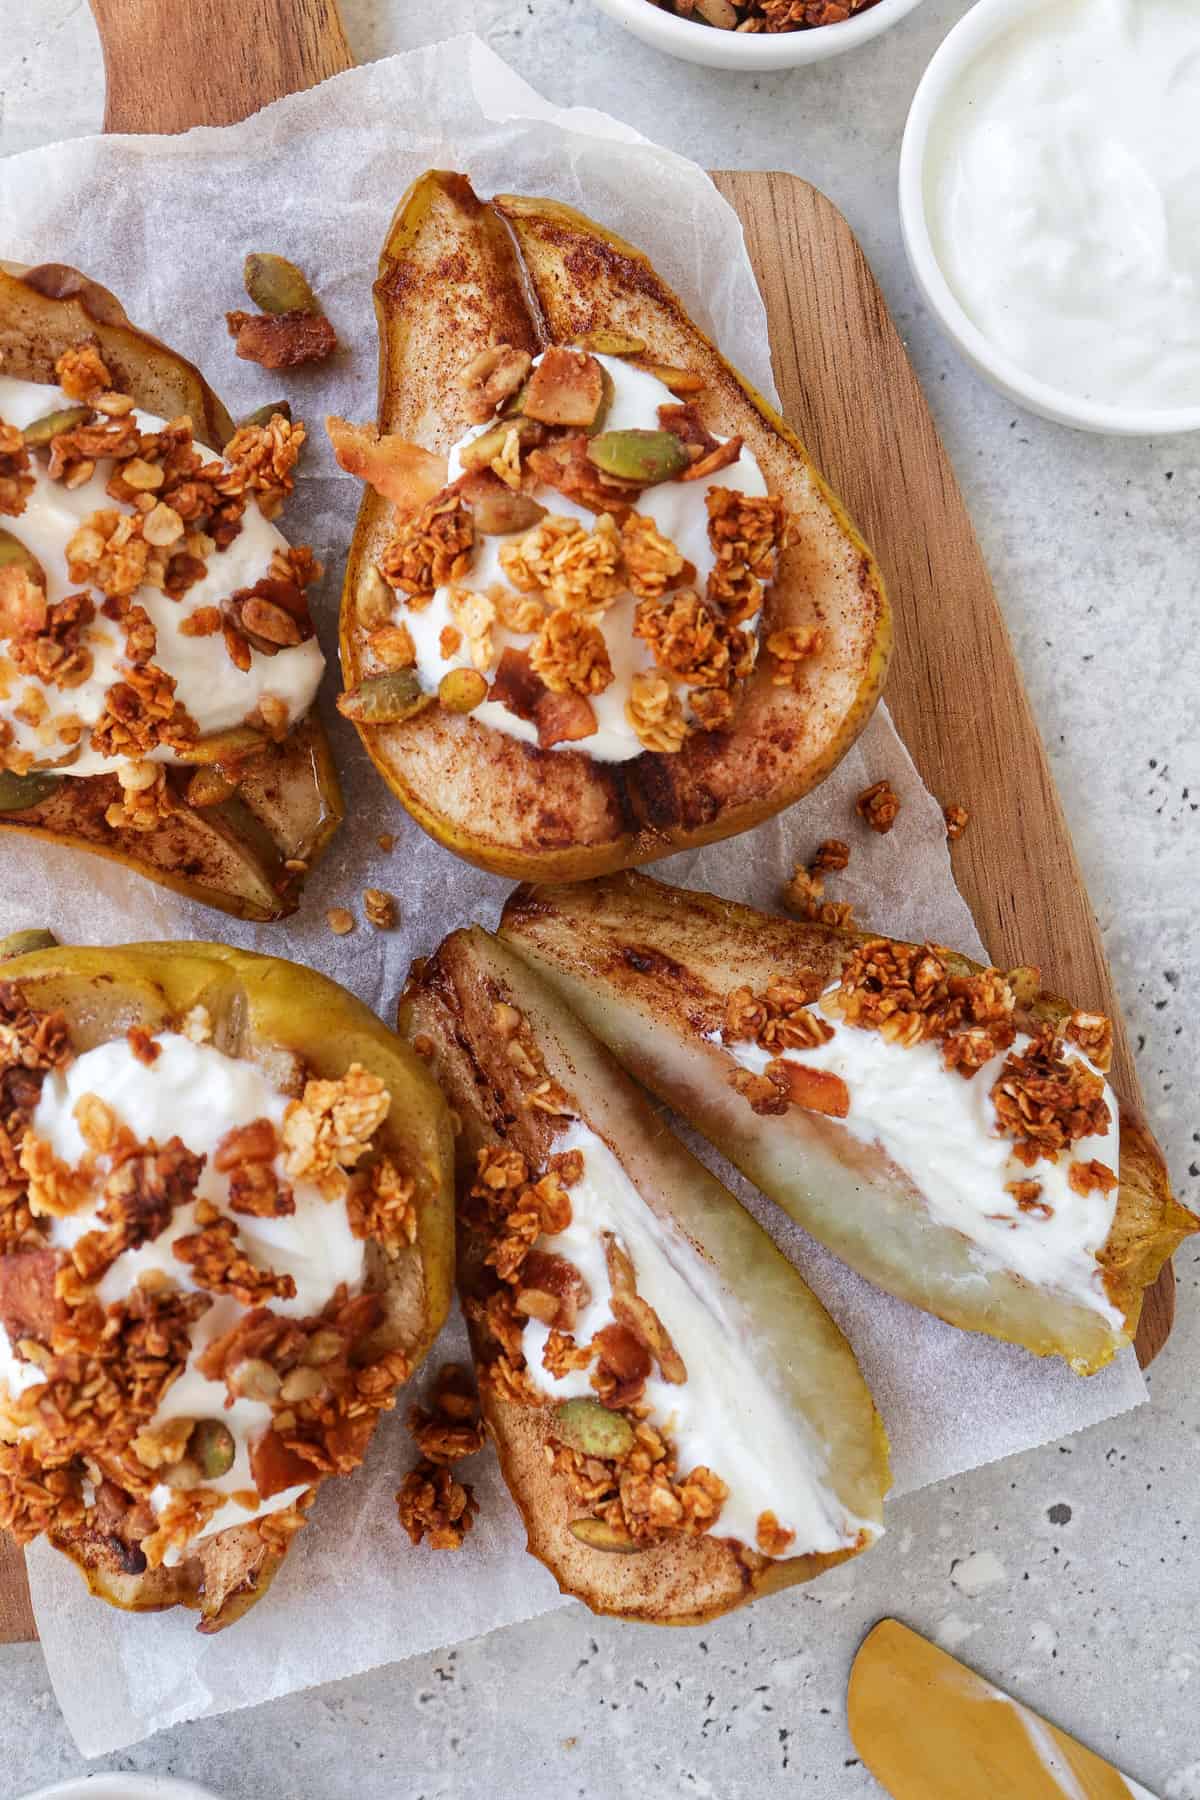 close up shot of baked pears on wooden board topped with plain yoghurt and granola. One pear cut in half.